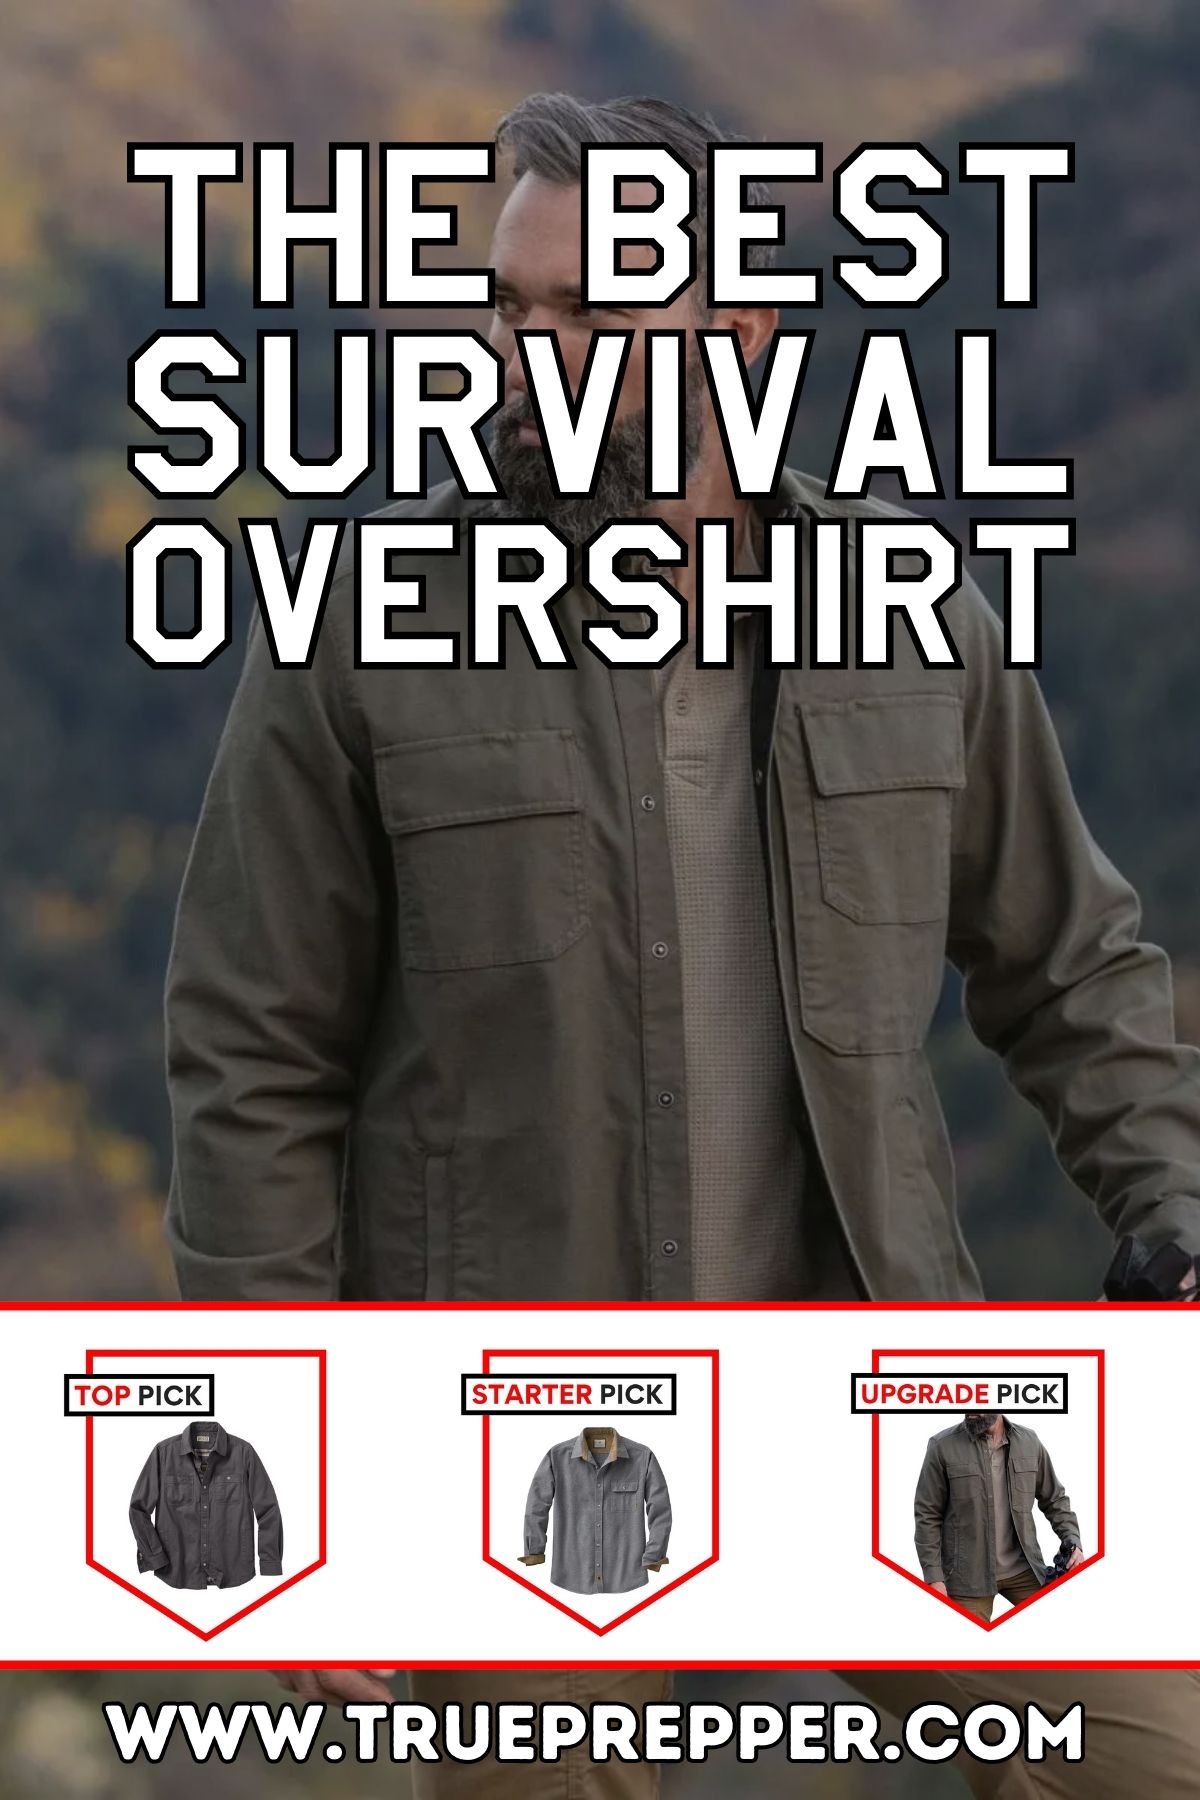 The Best Survival Overshirt